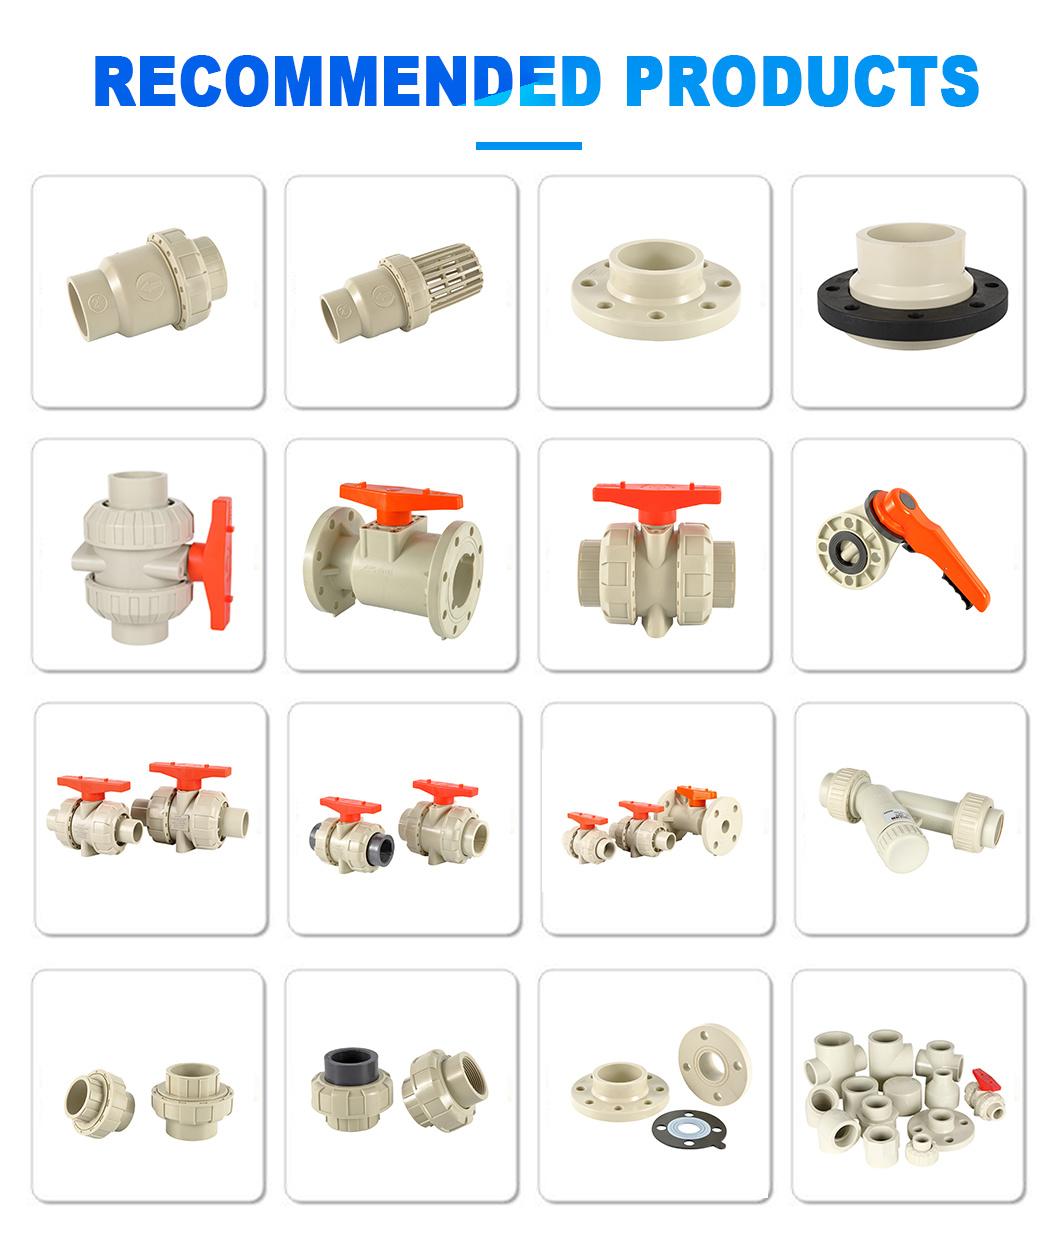 High Quality Casting Pphts Flange Pipe Fittings Plastic Welding Imported Raw Materials